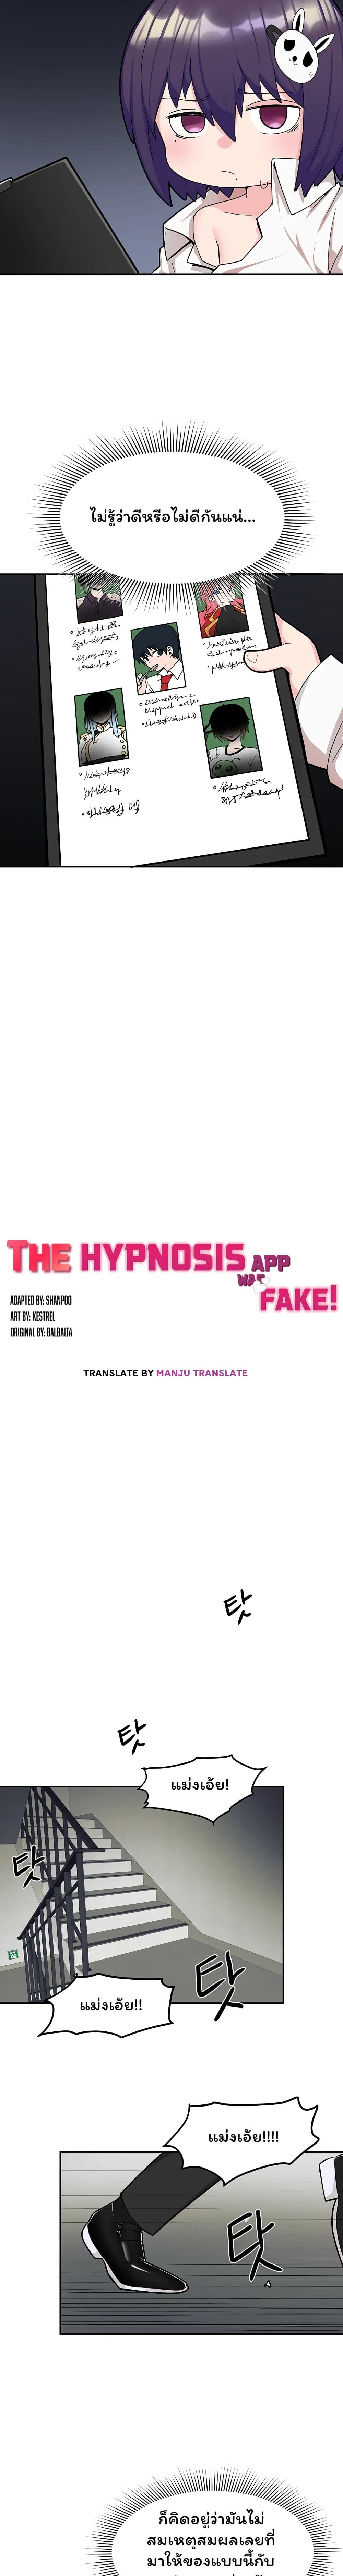 The Hypnosis App Was Fake 2 14